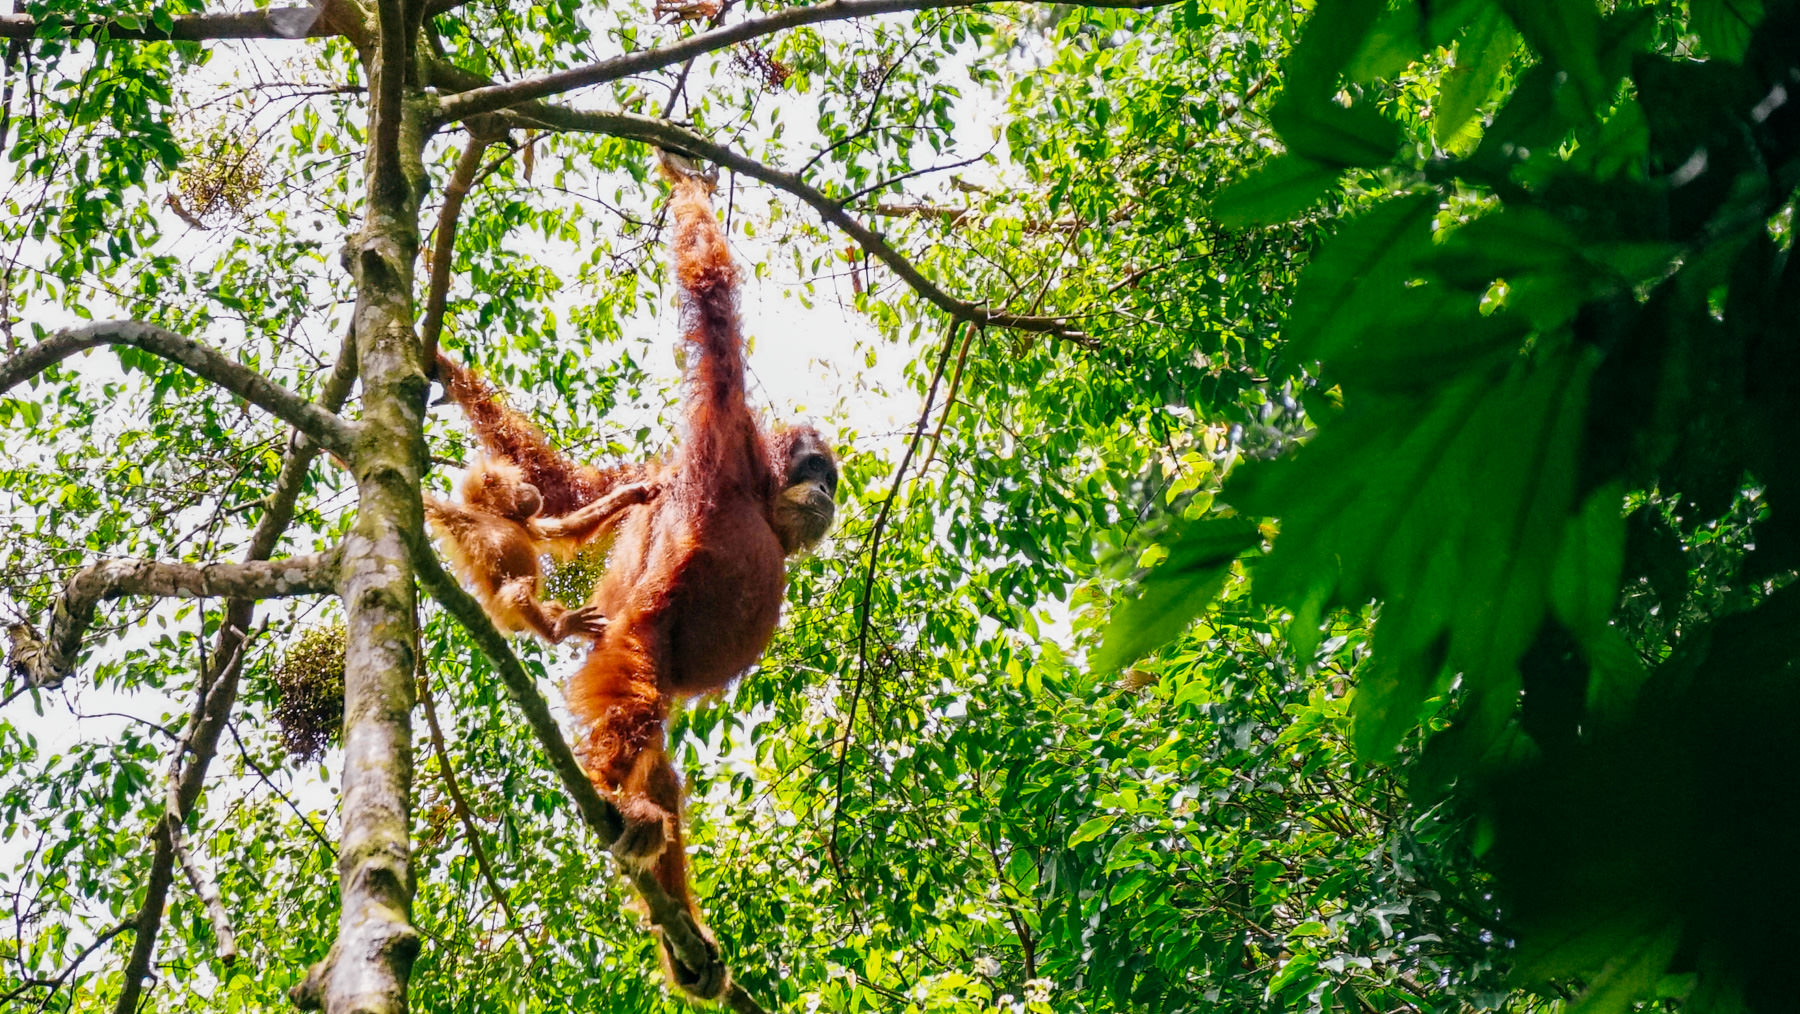 Orangutan baby and mother swinging through the trees